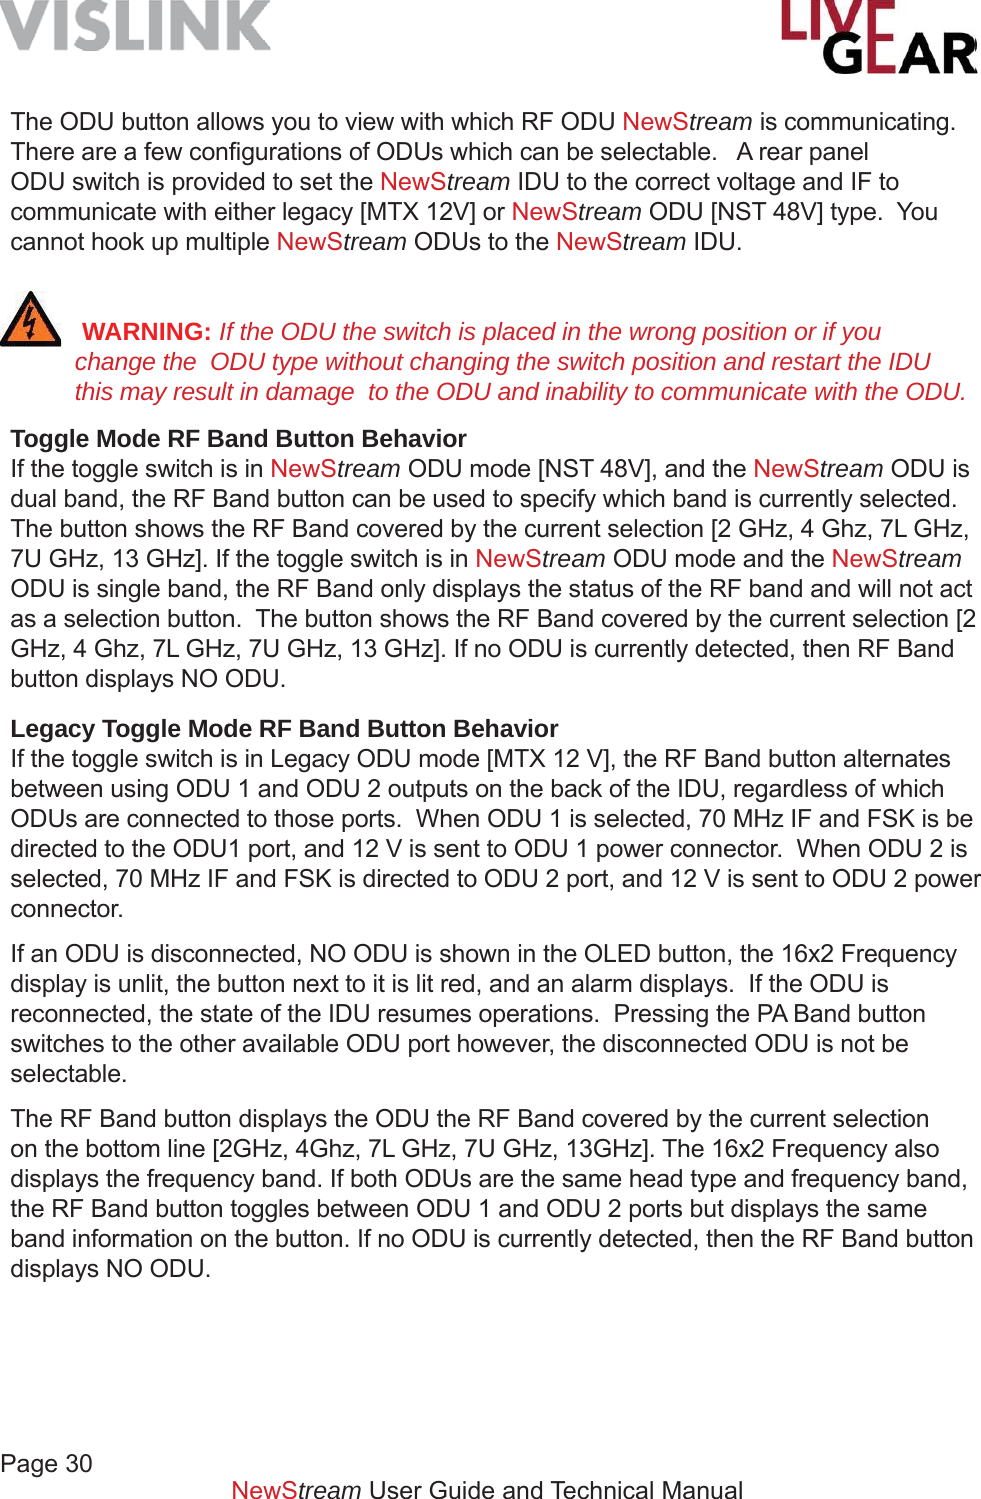 Page 30NewStream User Guide and Technical ManualThe ODU button allows you to view with which RF ODU NewStream is communicating.  There are a few conﬁ gurations of ODUs which can be selectable.   A rear panel ODU switch is provided to set the NewStream IDU to the correct voltage and IF to communicate with either legacy [MTX 12V] or NewStream ODU [NST 48V] type.  You cannot hook up multiple NewStream ODUs to the NewStream IDU. WARNING: If the ODU the switch is placed in the wrong position or if you change the  ODU type without changing the switch position and restart the IDU this may result in damage  to the ODU and inability to communicate with the ODU.Toggle Mode RF Band Button BehaviorIf the toggle switch is in NewStream ODU mode [NST 48V], and the NewStream ODU is dual band, the RF Band button can be used to specify which band is currently selected.  The button shows the RF Band covered by the current selection [2 GHz, 4 Ghz, 7L GHz, 7U GHz, 13 GHz]. If the toggle switch is in NewStream ODU mode and the NewStream ODU is single band, the RF Band only displays the status of the RF band and will not act as a selection button.  The button shows the RF Band covered by the current selection [2 GHz, 4 Ghz, 7L GHz, 7U GHz, 13 GHz]. If no ODU is currently detected, then RF Band button displays NO ODU.Legacy Toggle Mode RF Band Button BehaviorIf the toggle switch is in Legacy ODU mode [MTX 12 V], the RF Band button alternates between using ODU 1 and ODU 2 outputs on the back of the IDU, regardless of which ODUs are connected to those ports.  When ODU 1 is selected, 70 MHz IF and FSK is be directed to the ODU1 port, and 12 V is sent to ODU 1 power connector.  When ODU 2 is selected, 70 MHz IF and FSK is directed to ODU 2 port, and 12 V is sent to ODU 2 power connector.  If an ODU is disconnected, NO ODU is shown in the OLED button, the 16x2 Frequency display is unlit, the button next to it is lit red, and an alarm displays.  If the ODU is reconnected, the state of the IDU resumes operations.  Pressing the PA Band button switches to the other available ODU port however, the disconnected ODU is not be selectable. The RF Band button displays the ODU the RF Band covered by the current selection on the bottom line [2GHz, 4Ghz, 7L GHz, 7U GHz, 13GHz]. The 16x2 Frequency also displays the frequency band. If both ODUs are the same head type and frequency band, the RF Band button toggles between ODU 1 and ODU 2 ports but displays the same band information on the button. If no ODU is currently detected, then the RF Band button displays NO ODU.